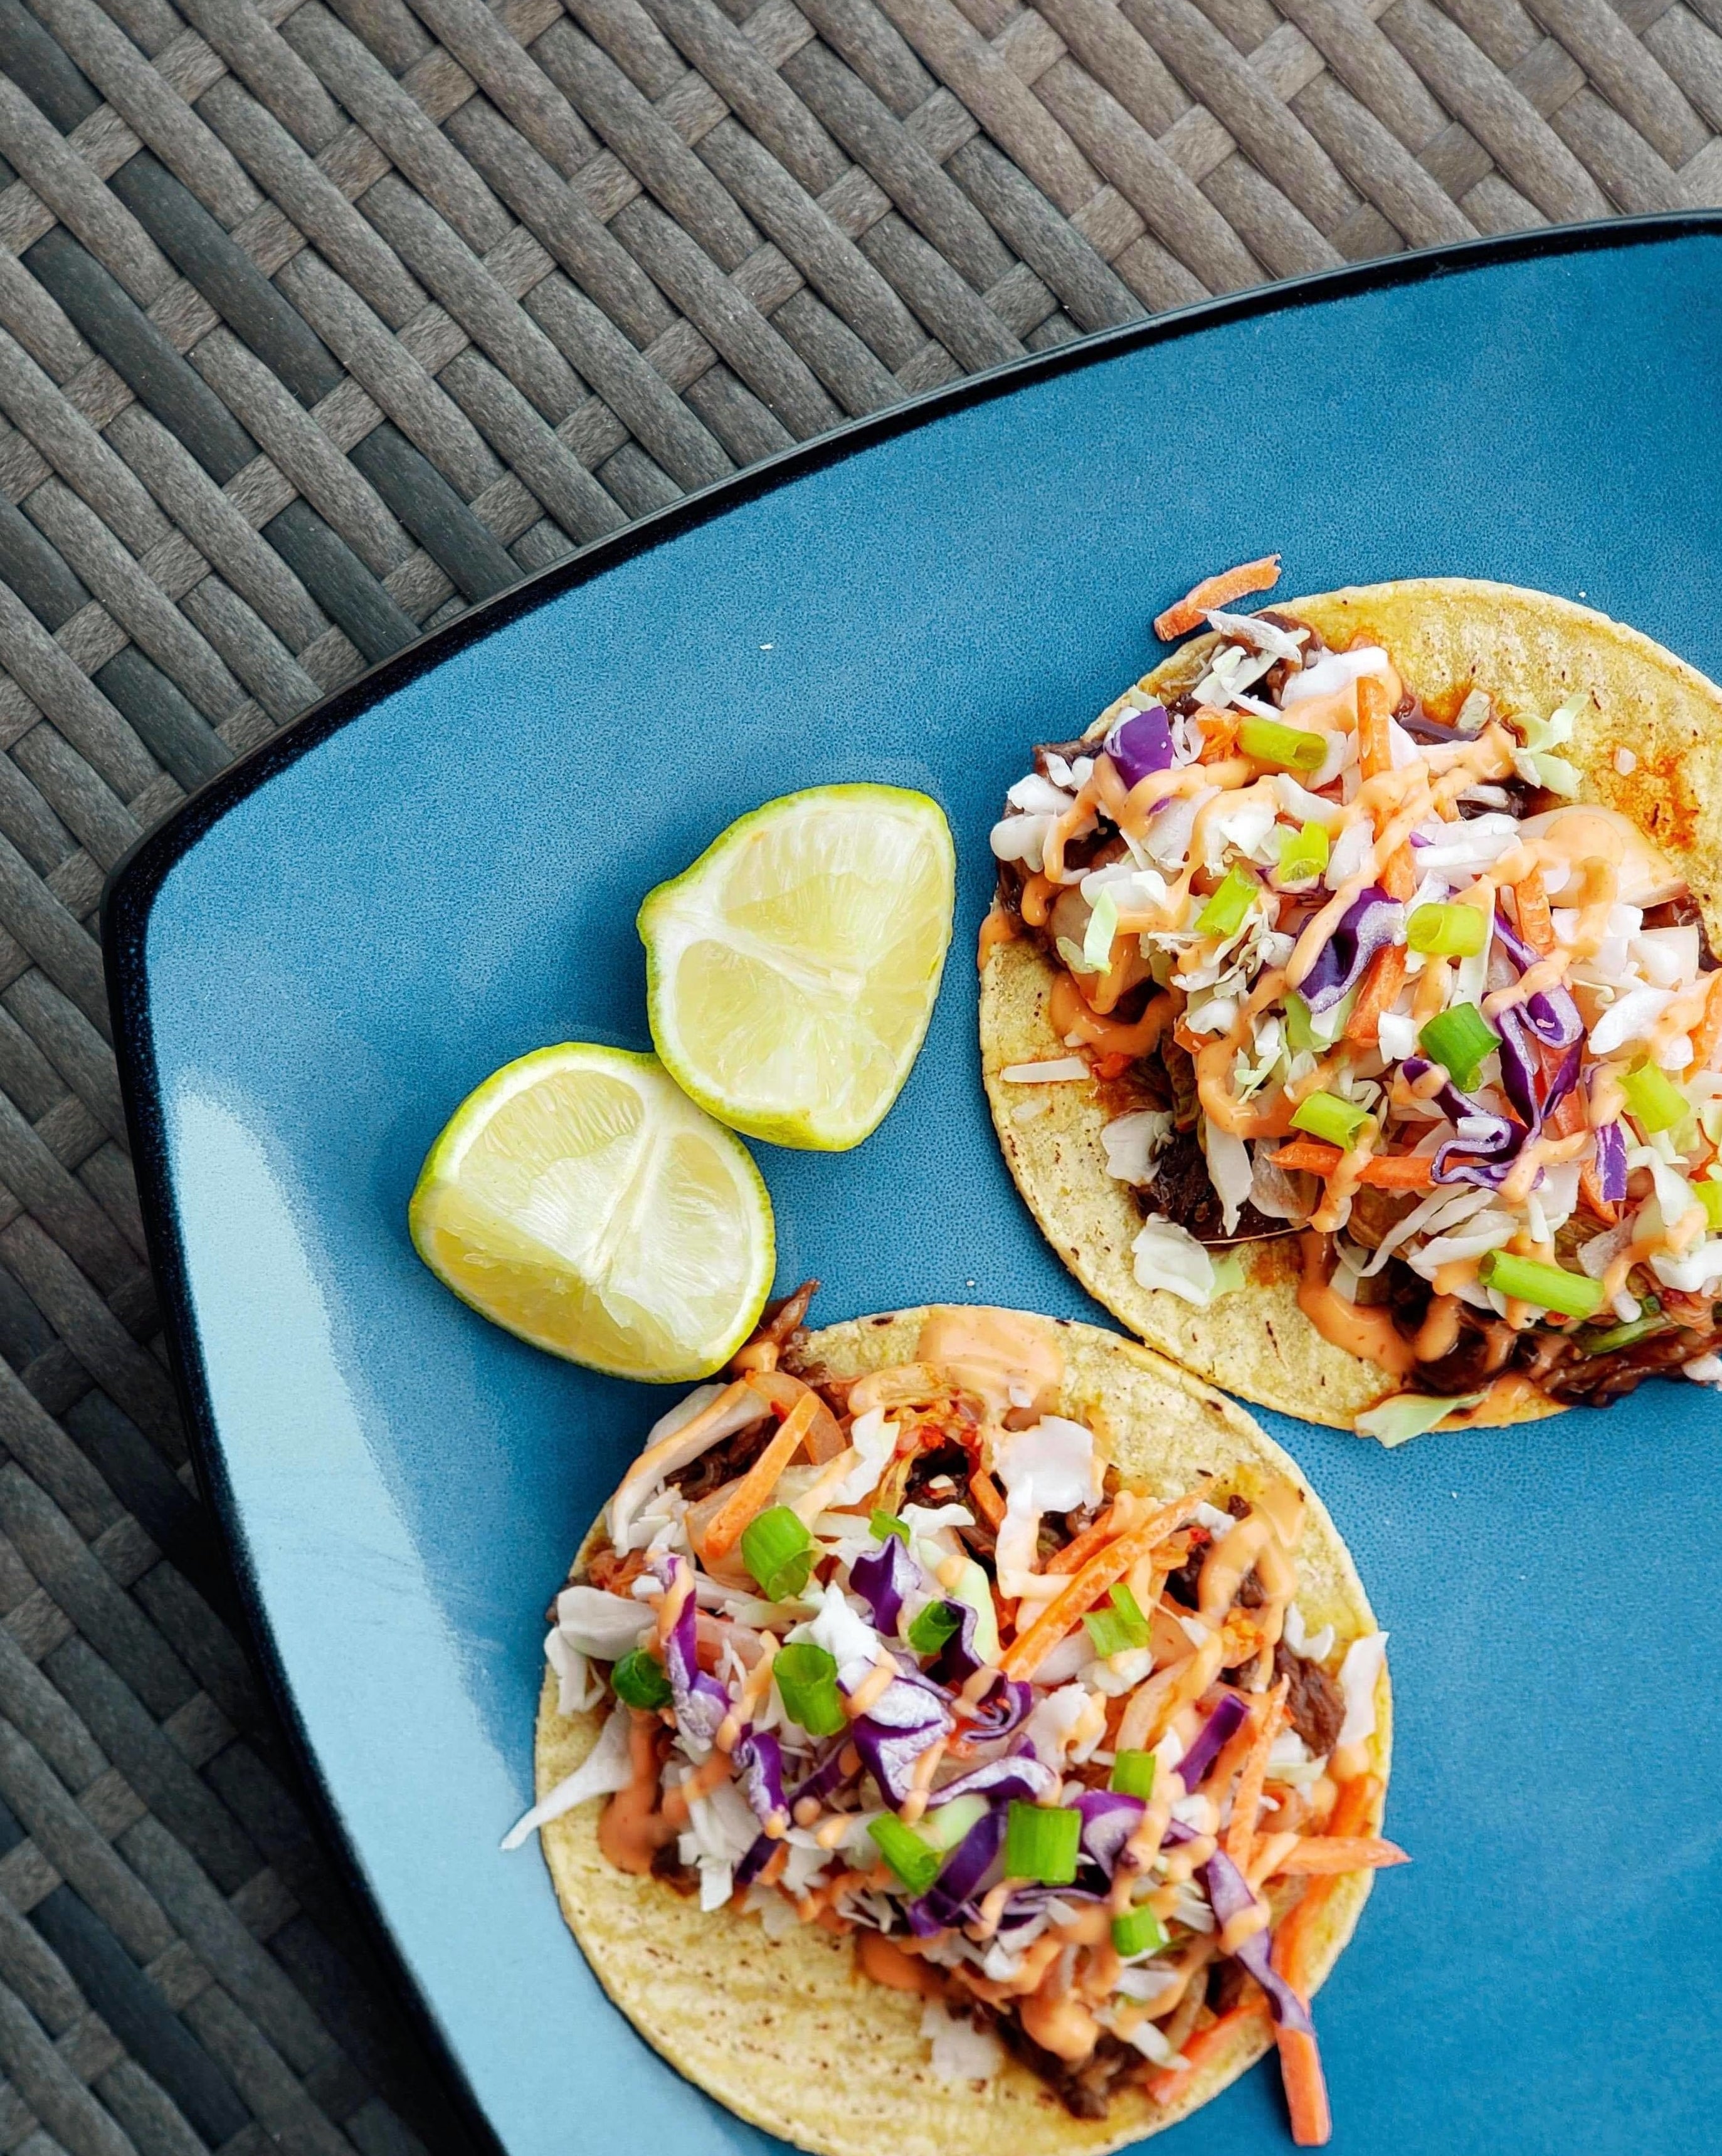 Here's How To Make Easy Korean Tacos At Home